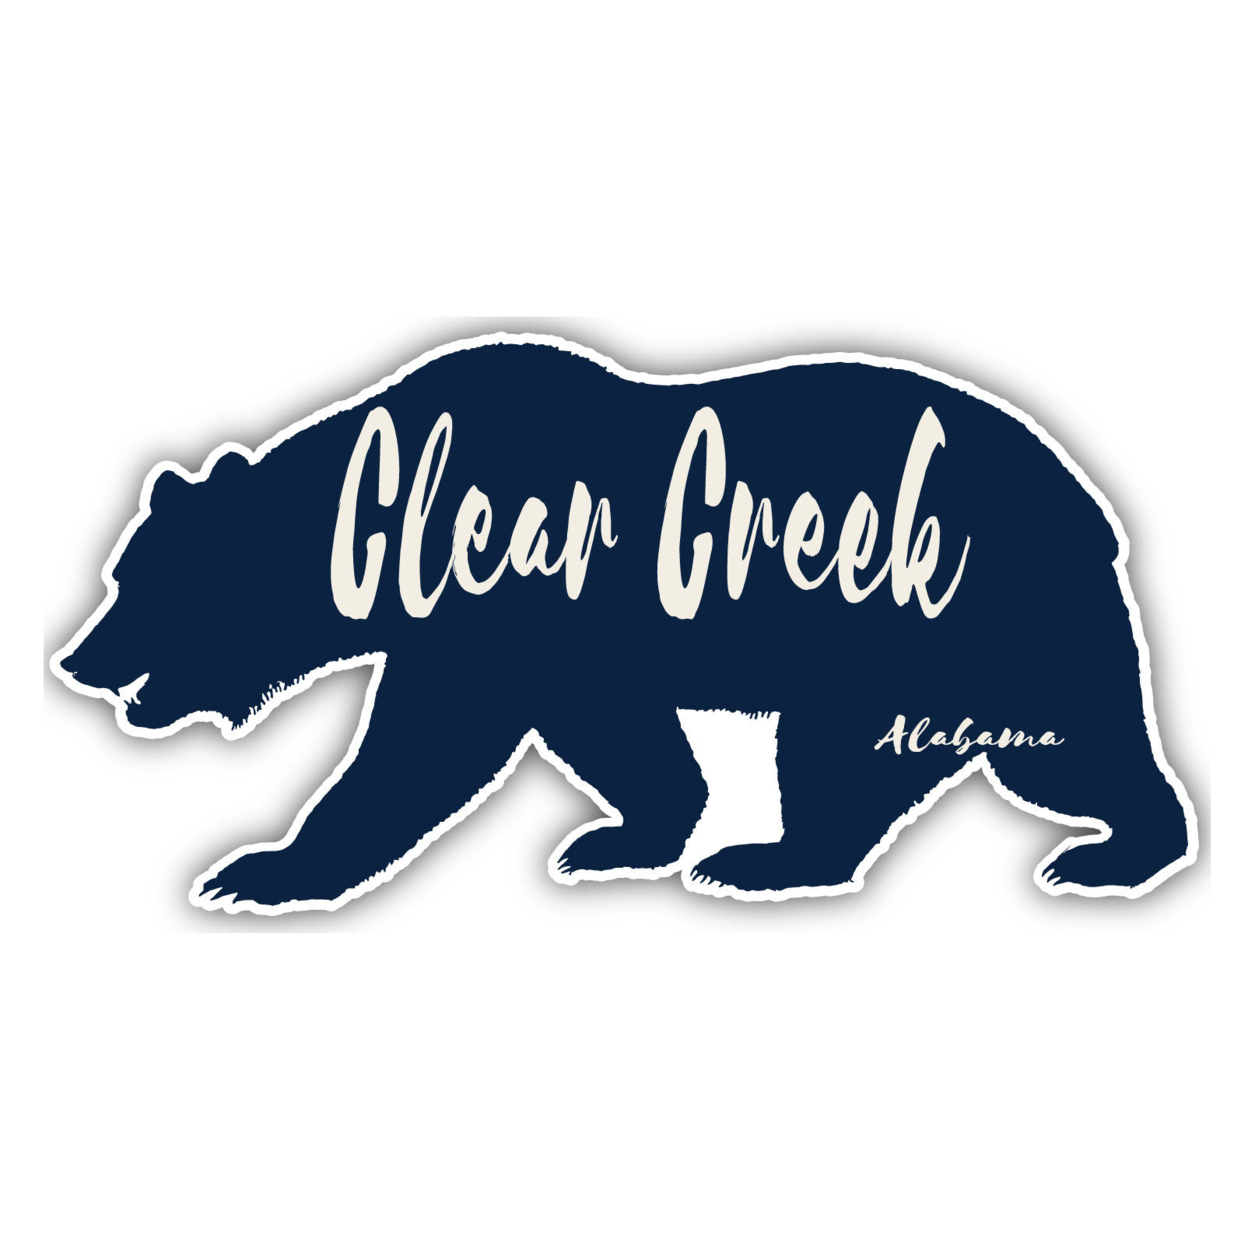 Clear Creek Alabama Souvenir Decorative Stickers (Choose Theme And Size) - 4-Pack, 12-Inch, Adventures Awaits